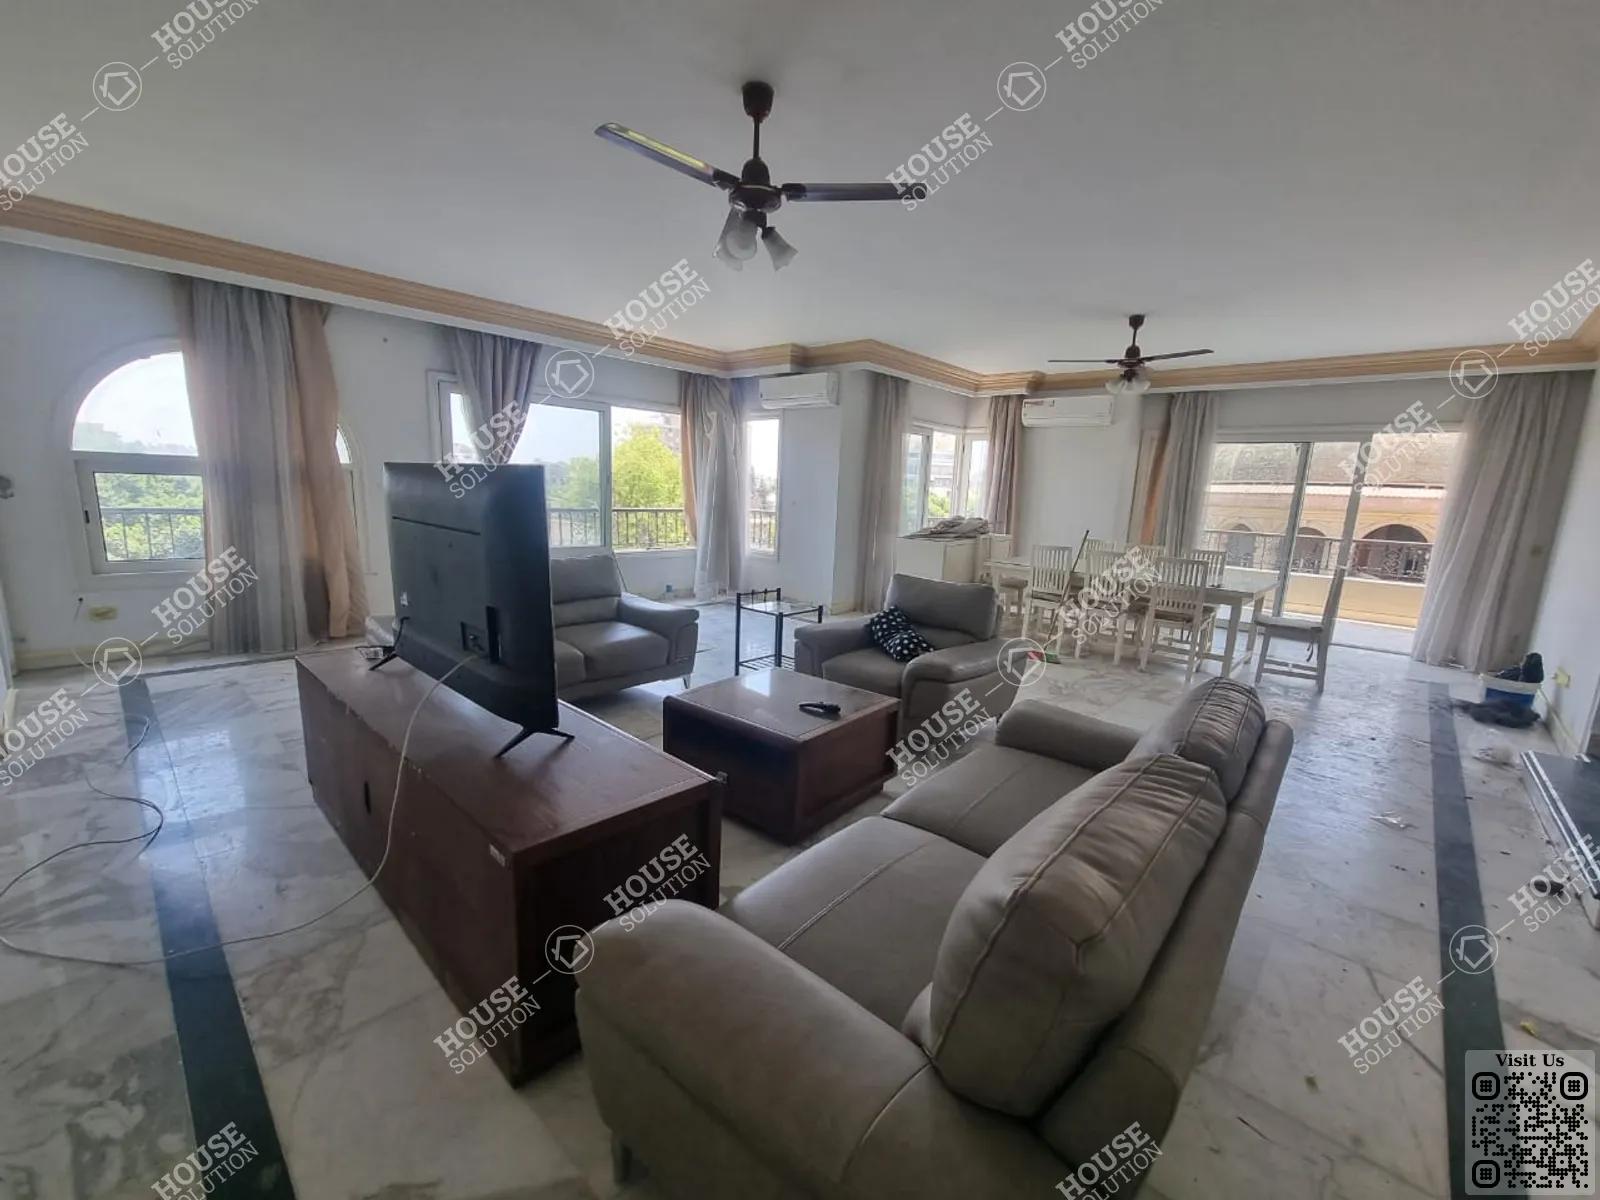 RECEPTION  @ Apartments For Rent In Maadi Maadi Degla Area: 300 m² consists of 4 Bedrooms 4 Bathrooms Modern furnished 5 stars #5690-2